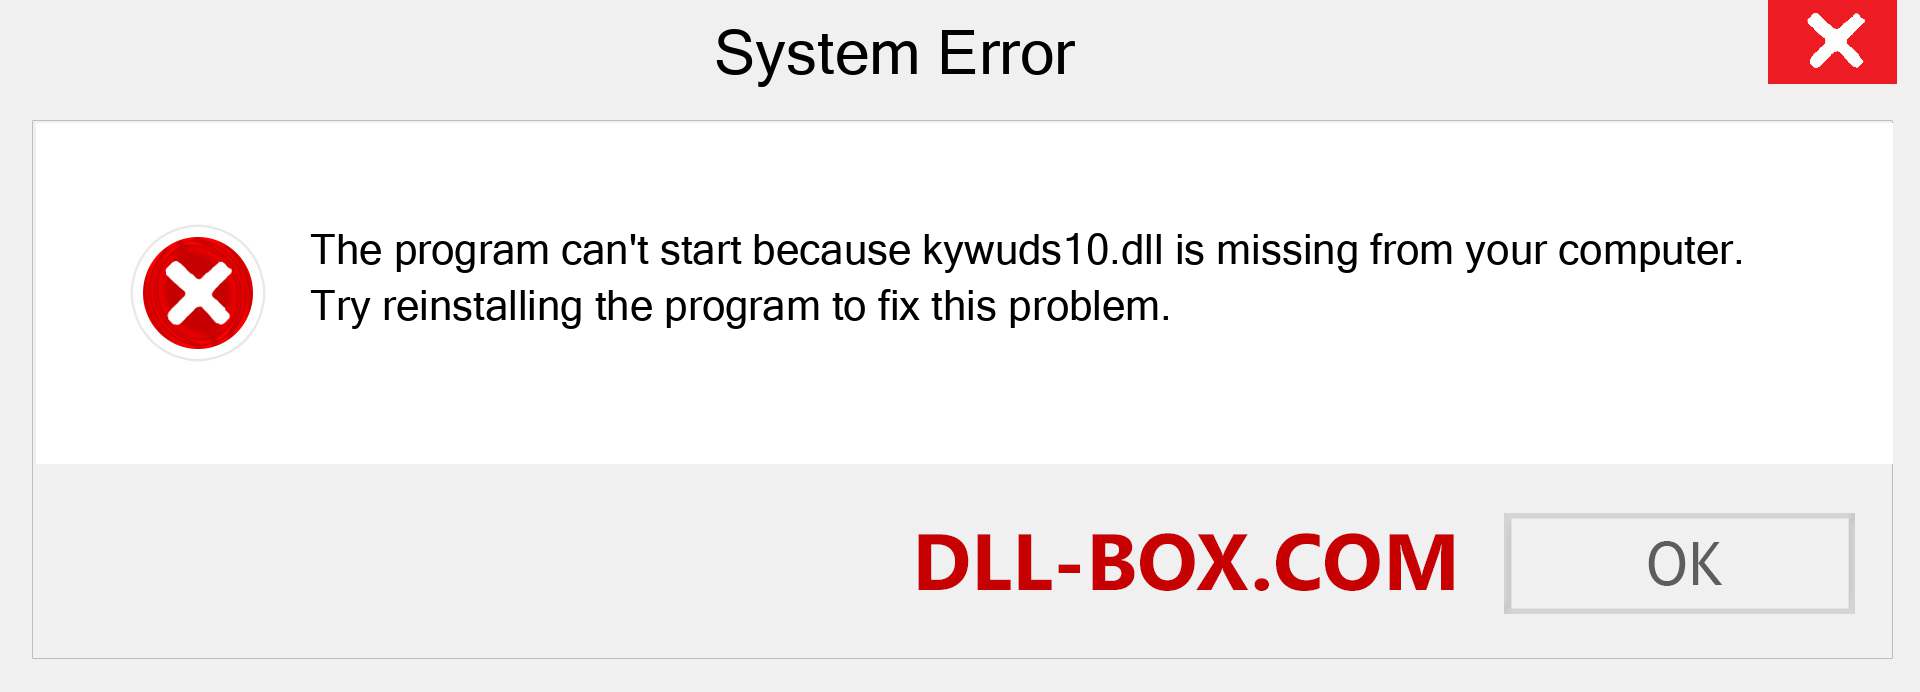  kywuds10.dll file is missing?. Download for Windows 7, 8, 10 - Fix  kywuds10 dll Missing Error on Windows, photos, images